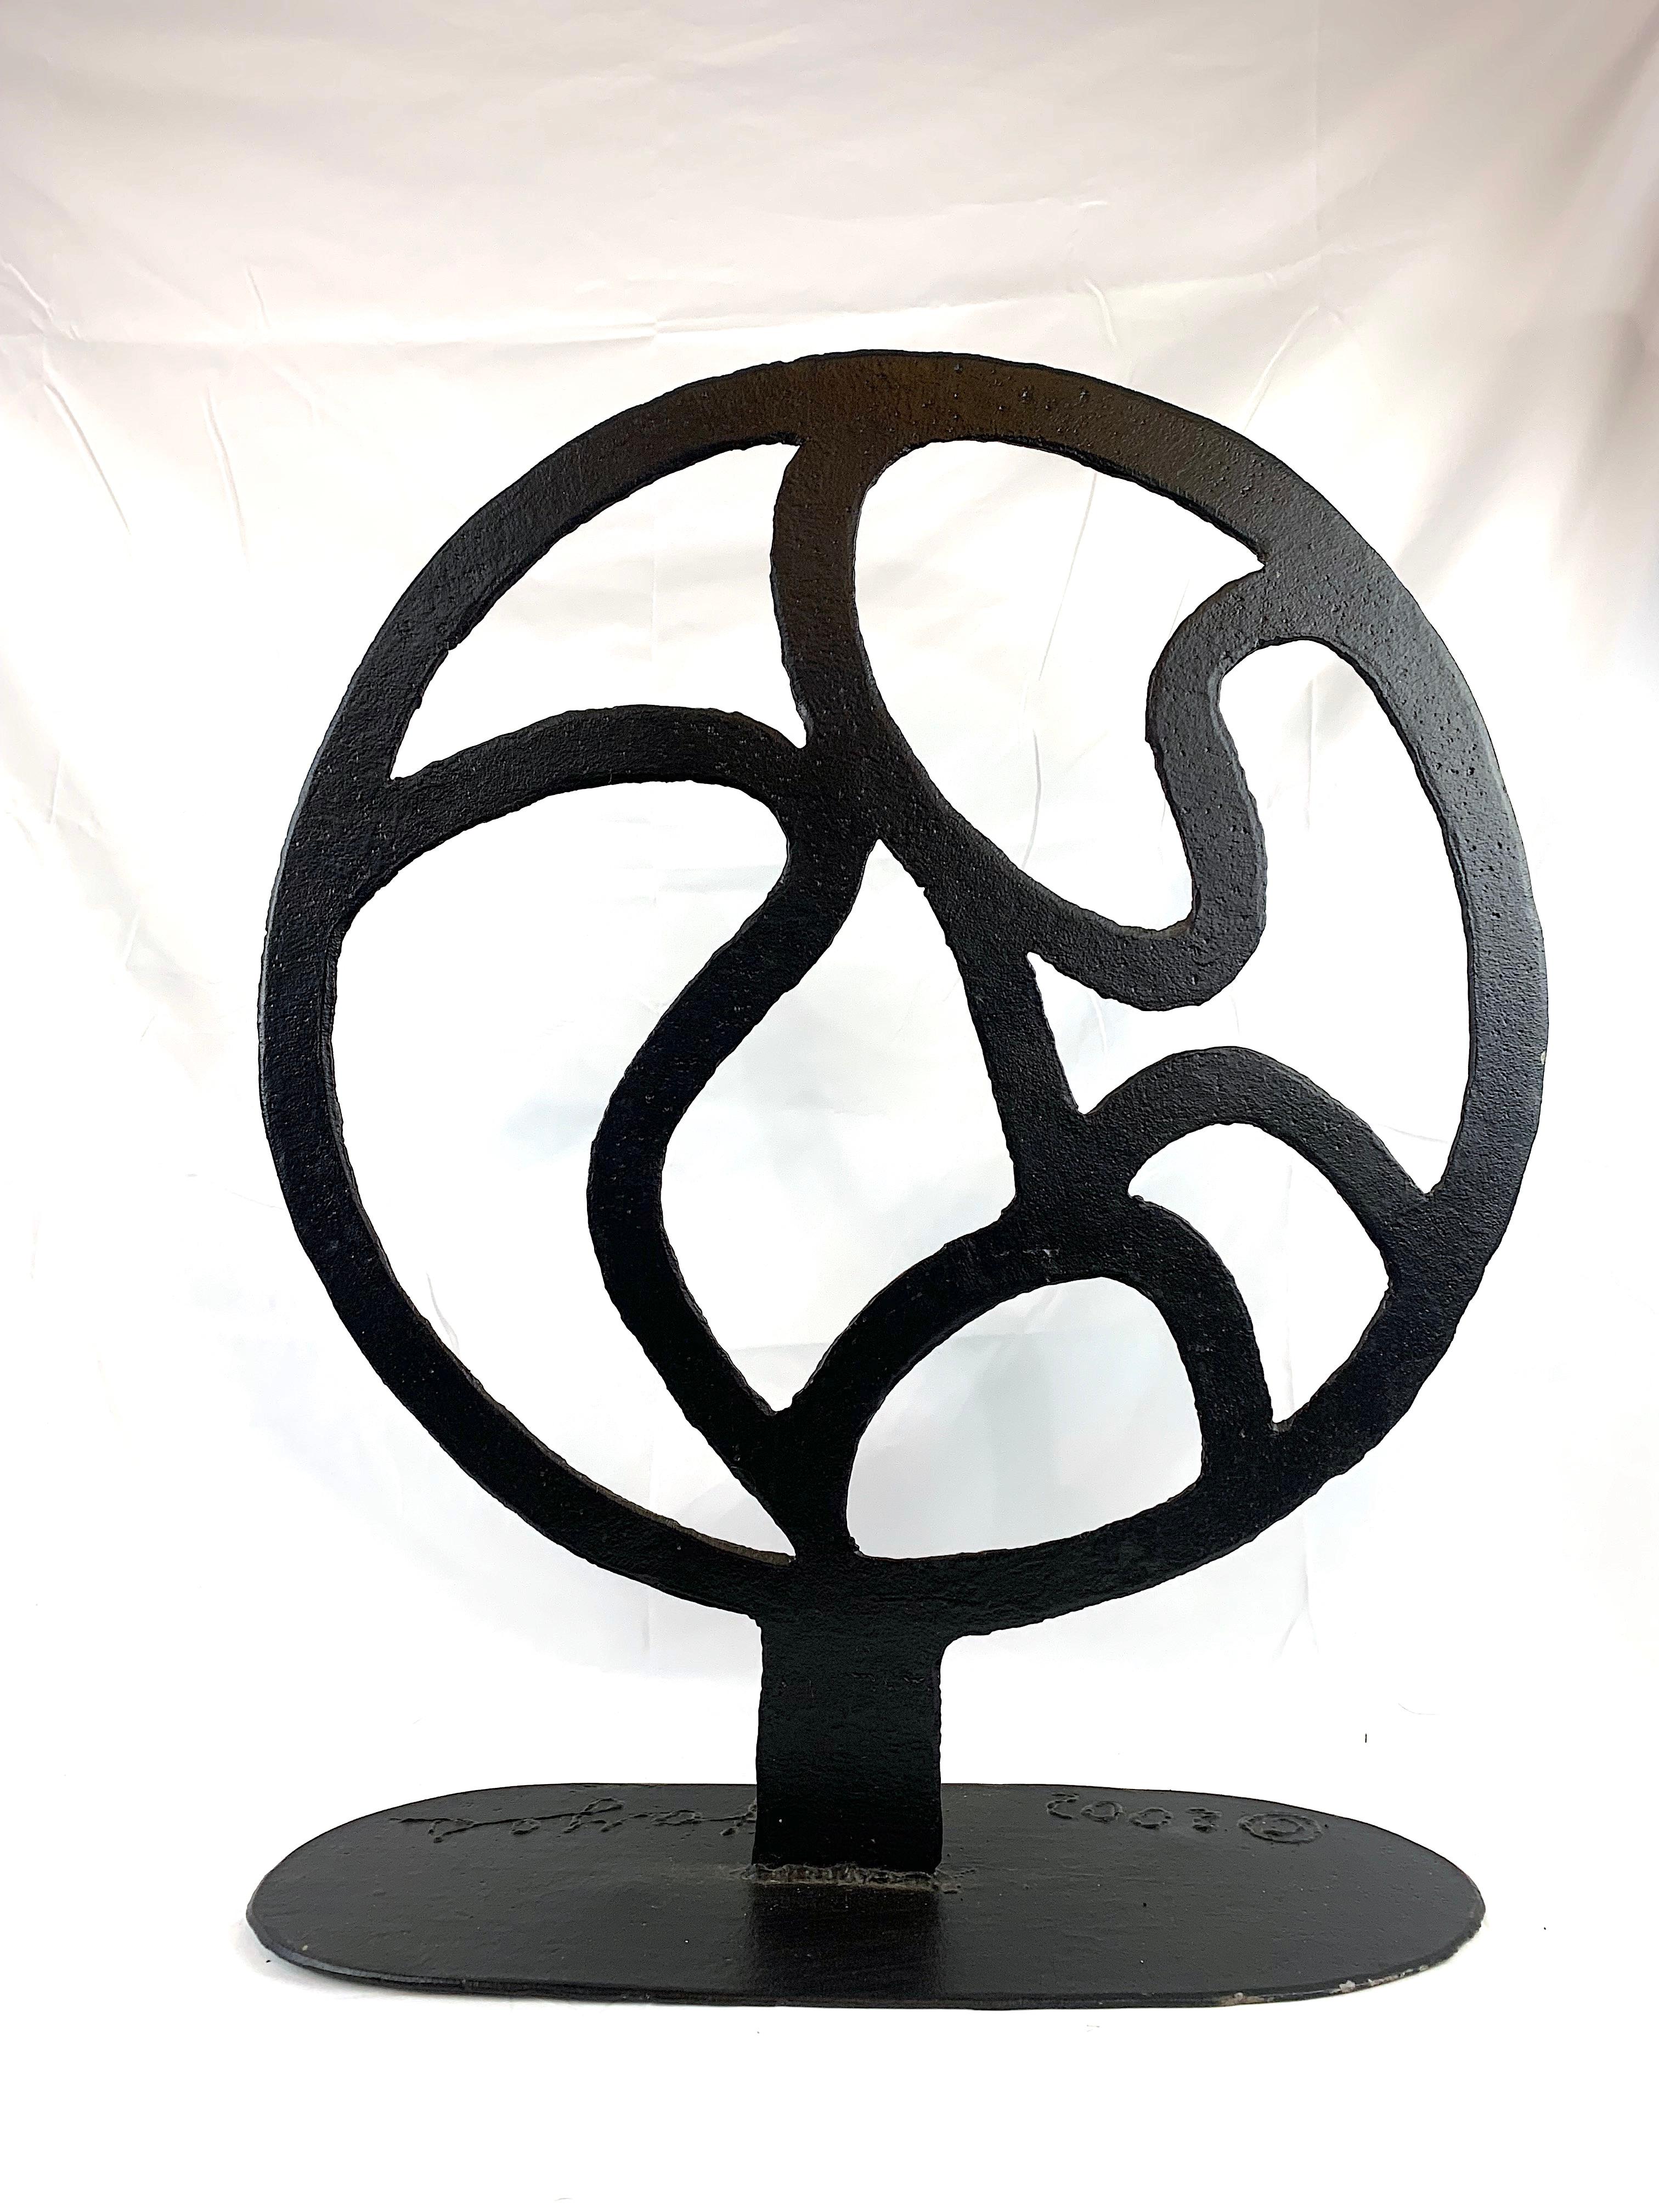 ODETTA is pleased to offer this important sculpture from the Estate of David Hayes

David Vincent Hayes (March 15, 1931 – April 9, 2013) was an American sculptor.

Hayes received a Bachelor of Arts degree from the University of Notre Dame in 1953,